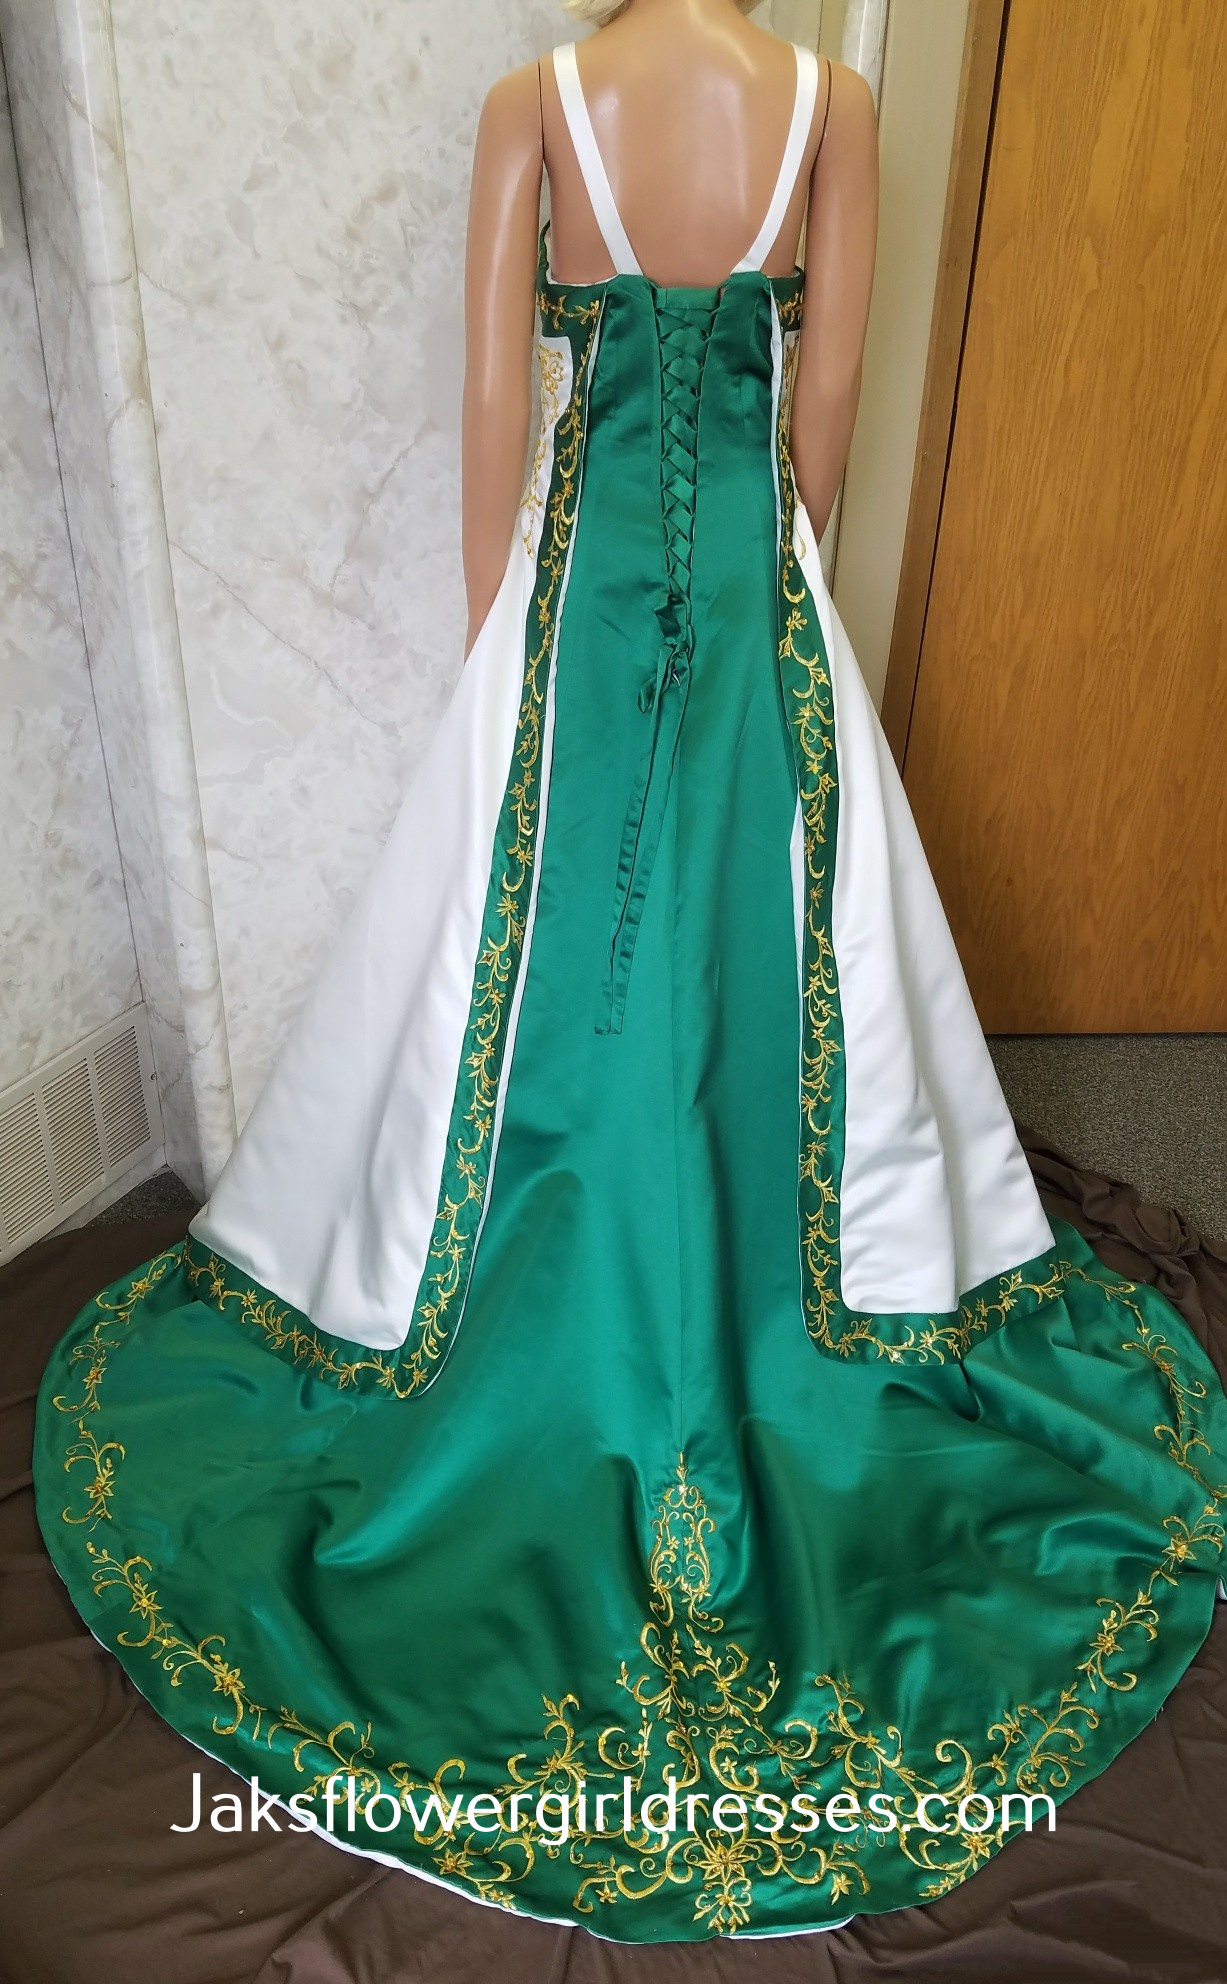 ivory and green wedding dress